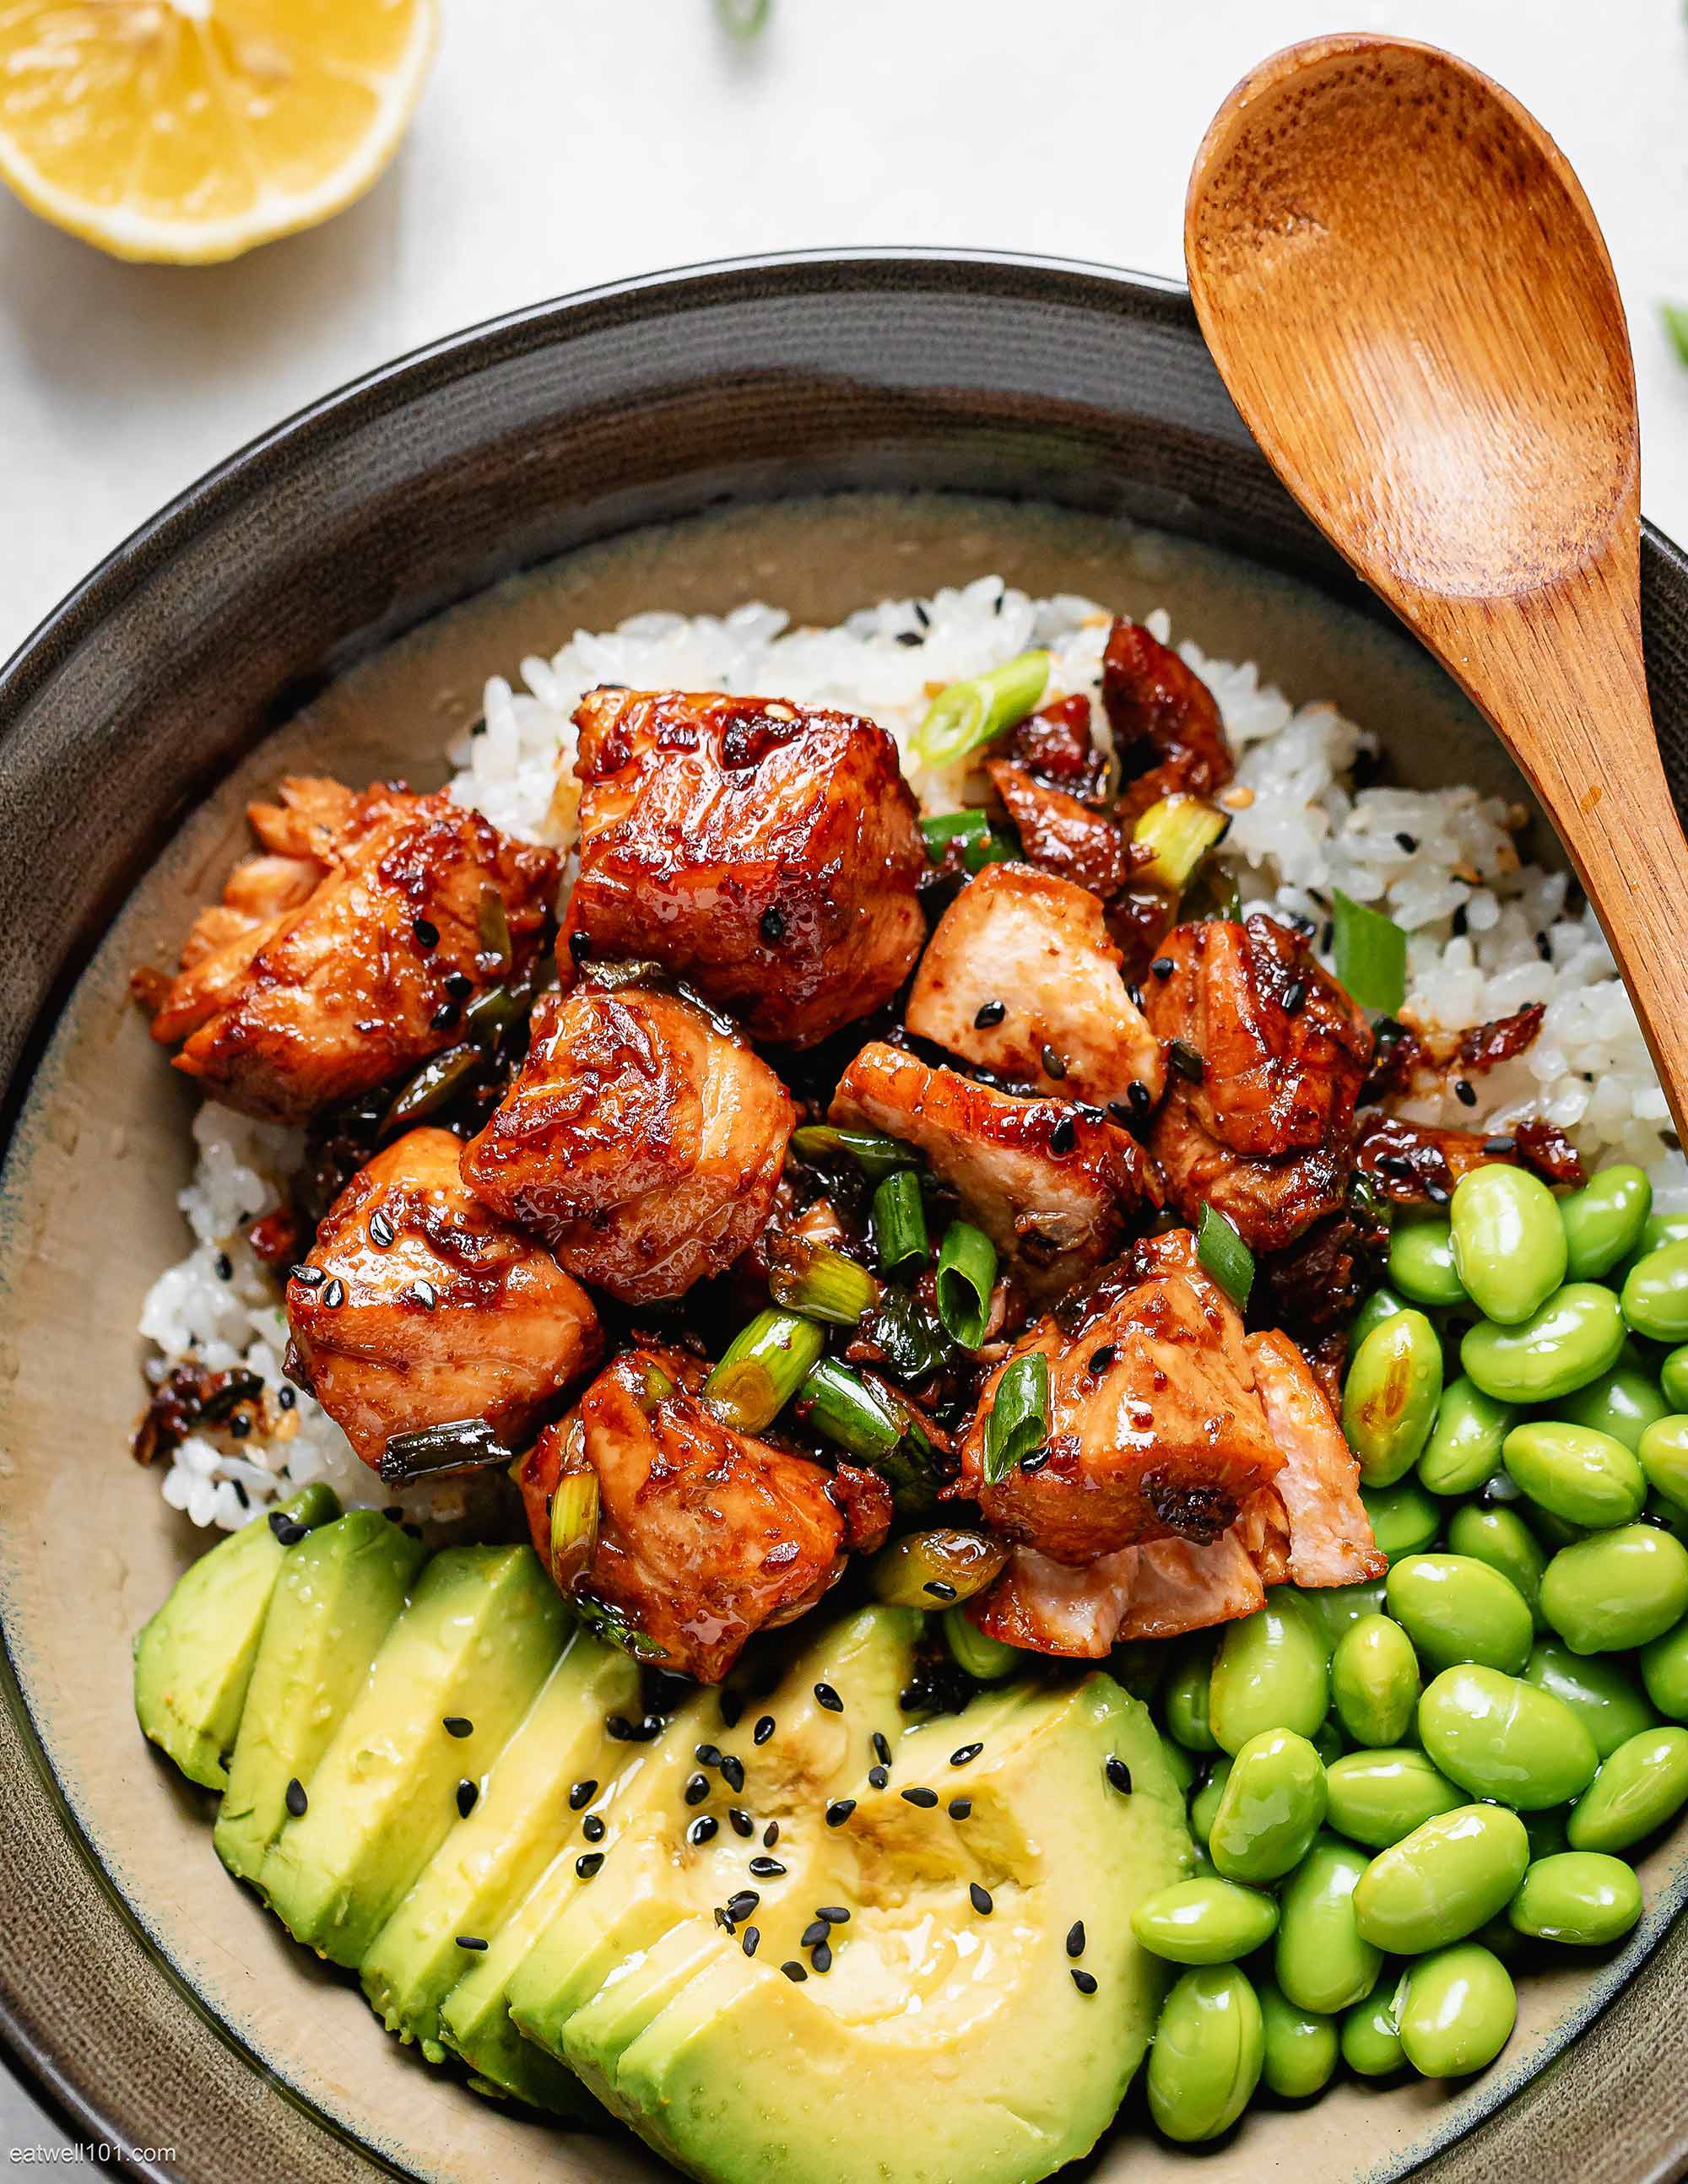 21 Delicious Salmon Bowl Recipes For Healthy Eating!